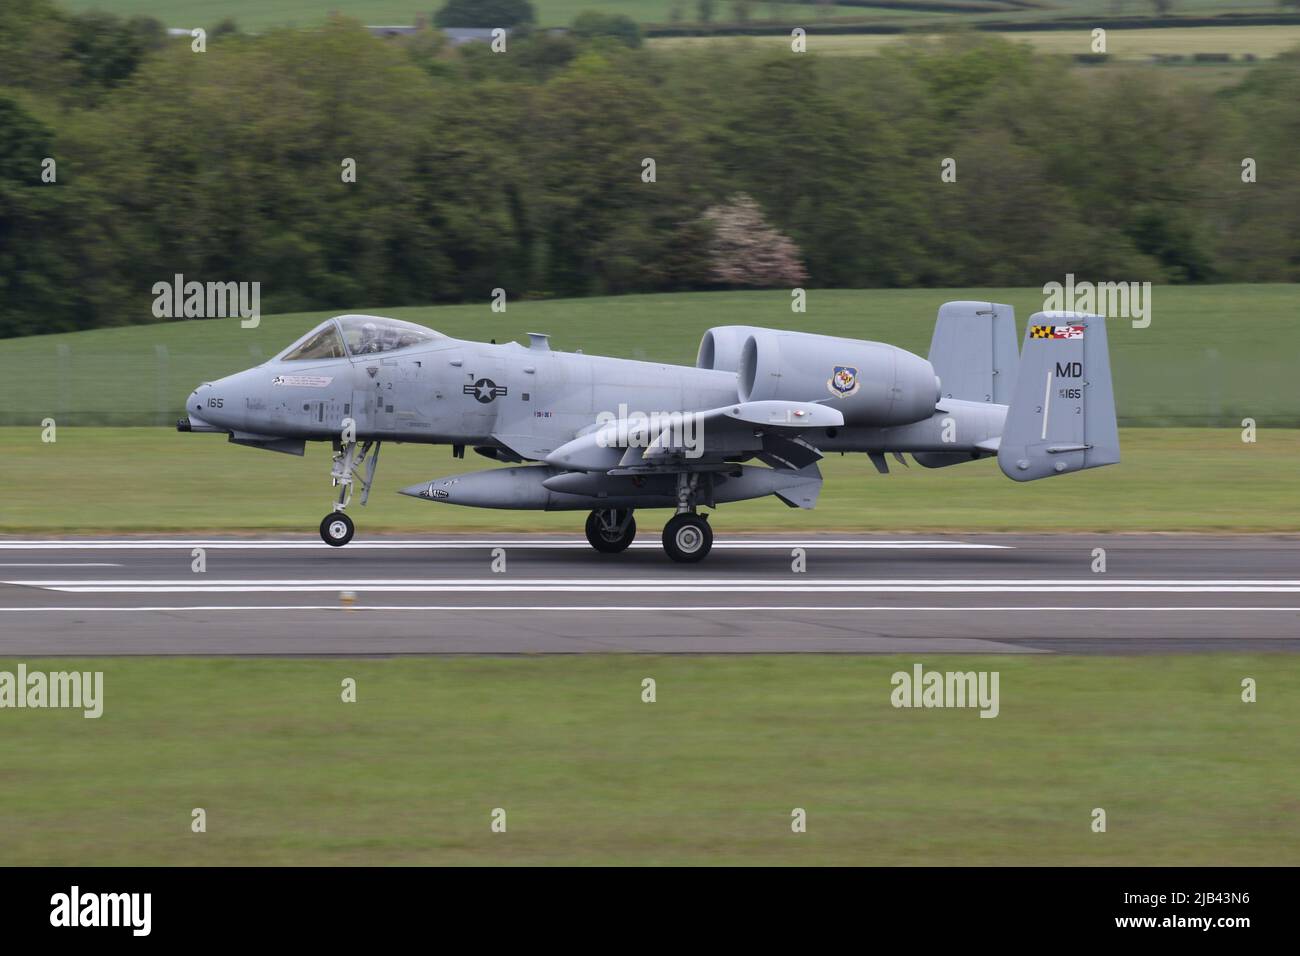 79-0165, a Fairchild Republic A-10C Thunderbolt II (or Warthog) operated by the 175th Wing of the Maryland Air National Guard of the United States Air Force, arriving at Prestwick International Airport in Ayrshire. The aircraft was one of ten A-10Cs routing through Prestwick on their journey from Latvia back to the USA, after participating in Exercise Swift Response. Stock Photo